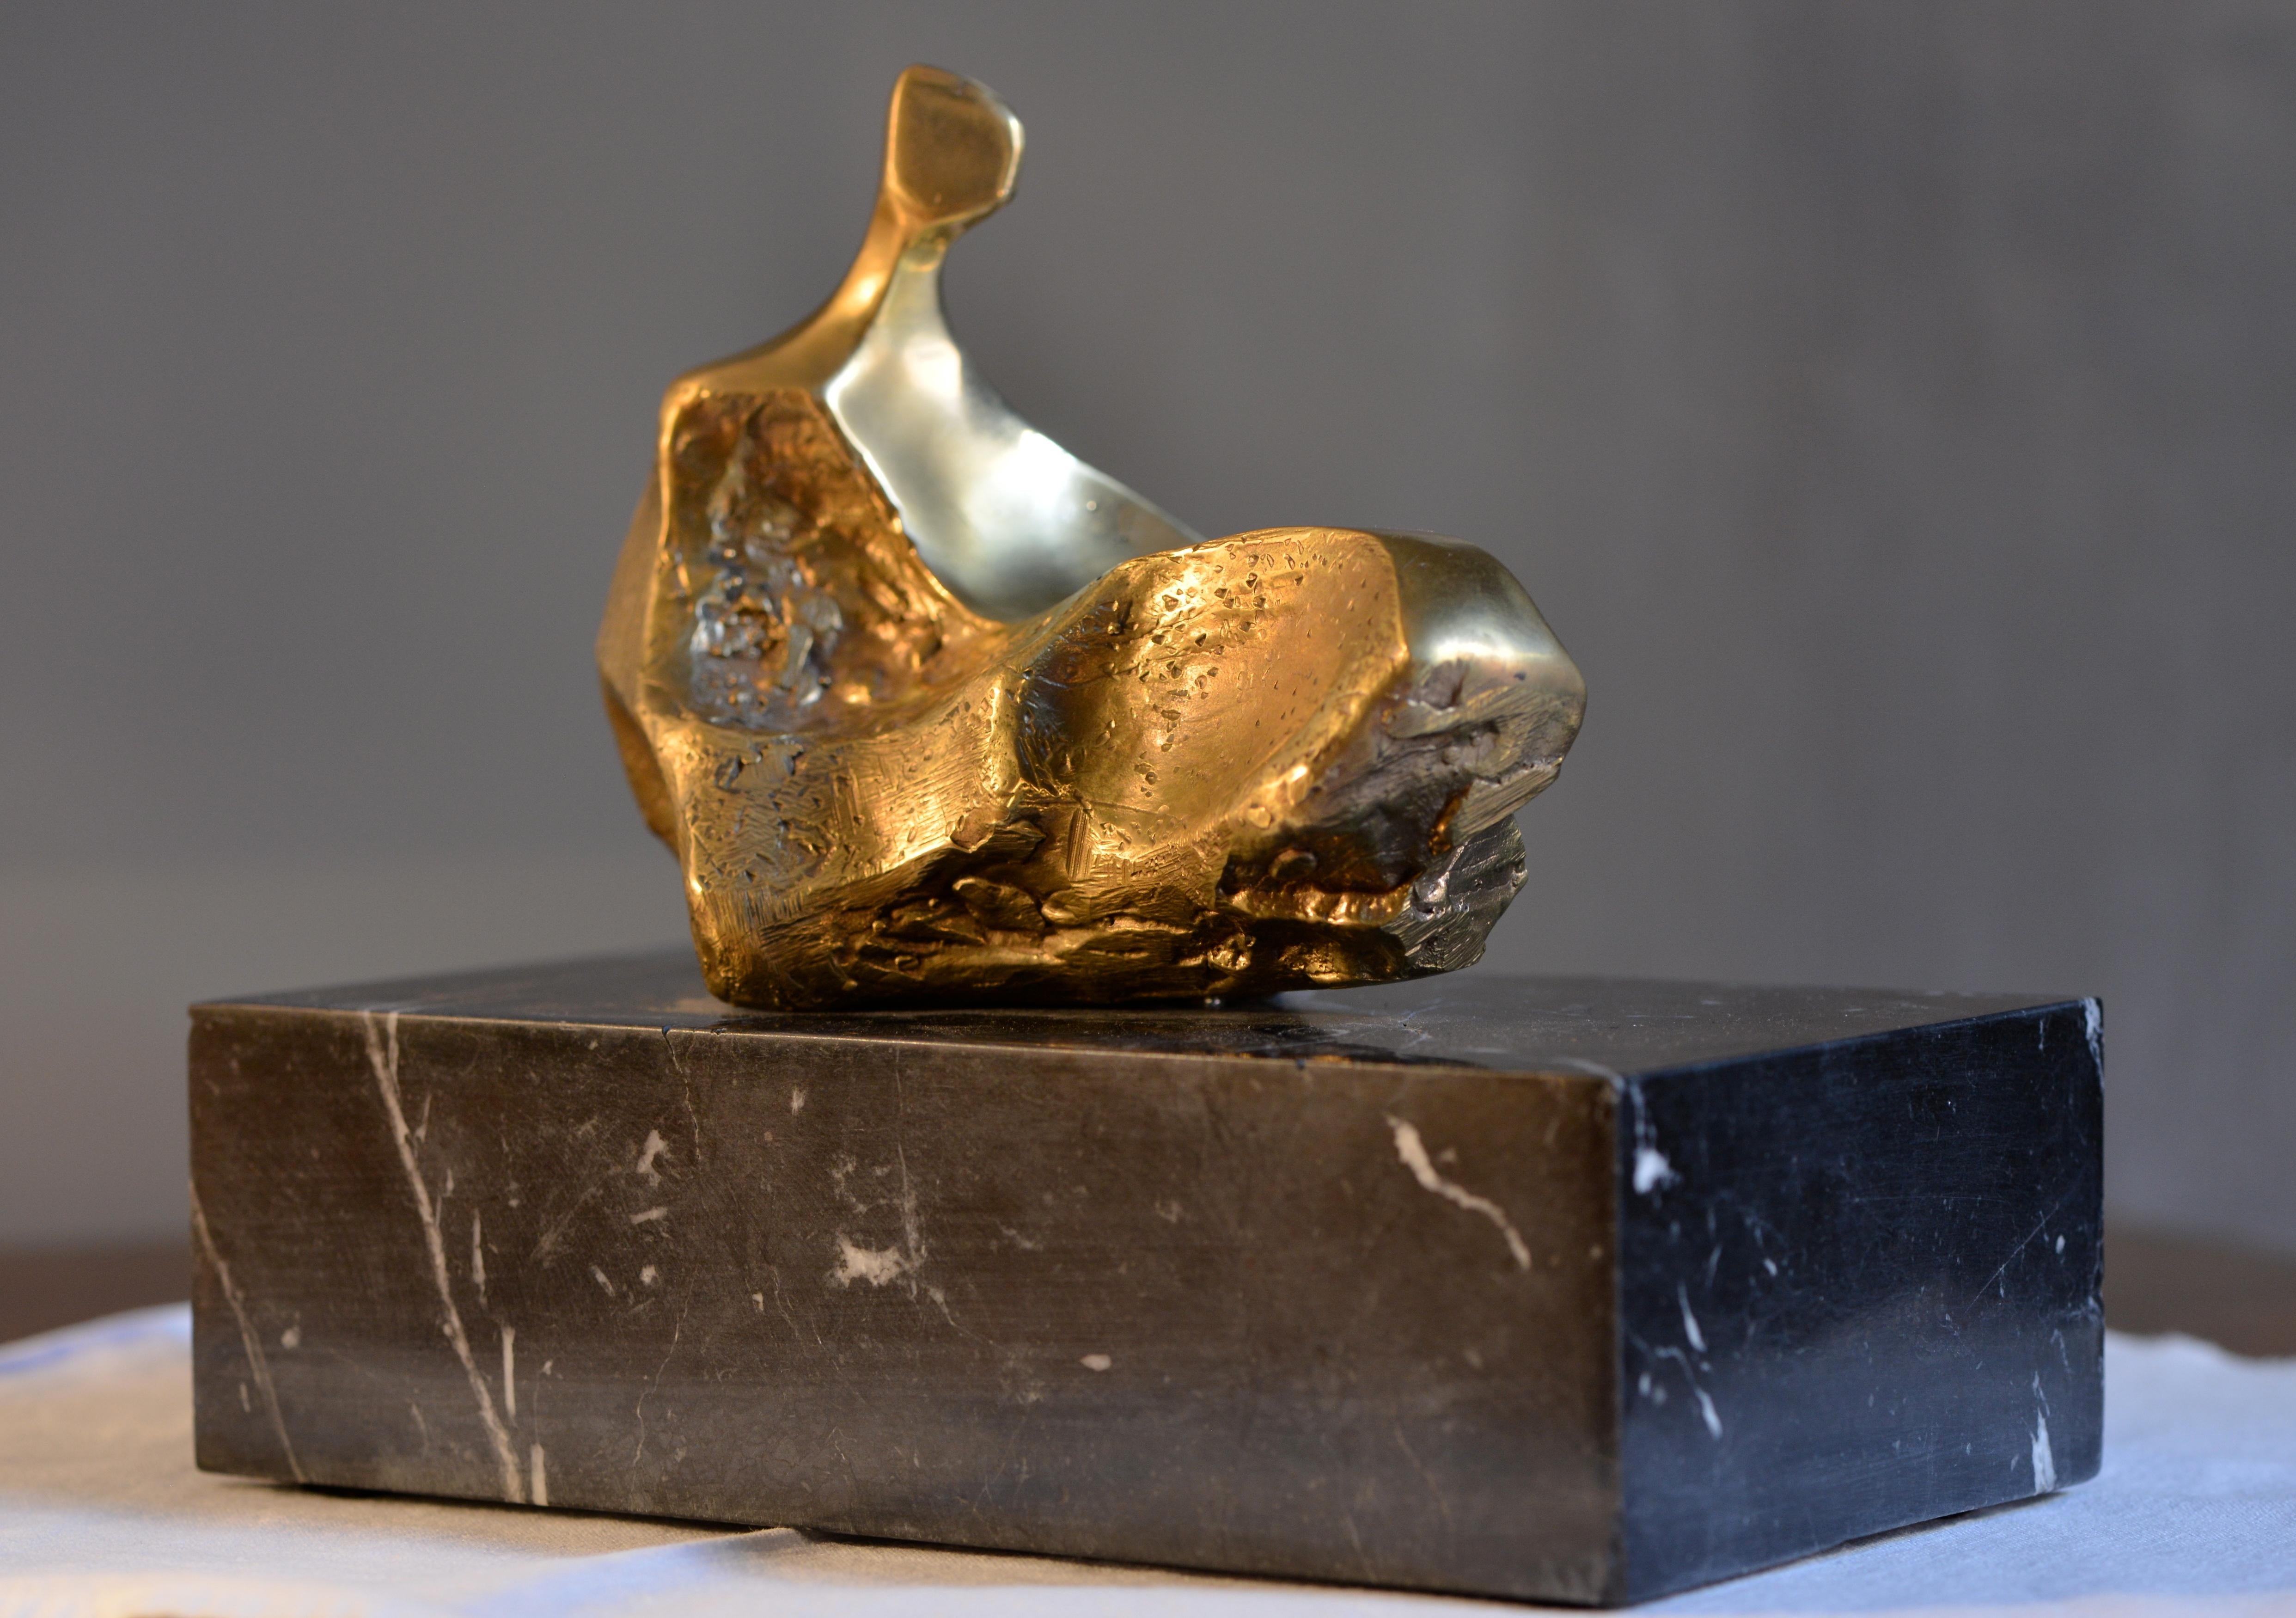 The sculpture (reclined female figure) is part of a series of 